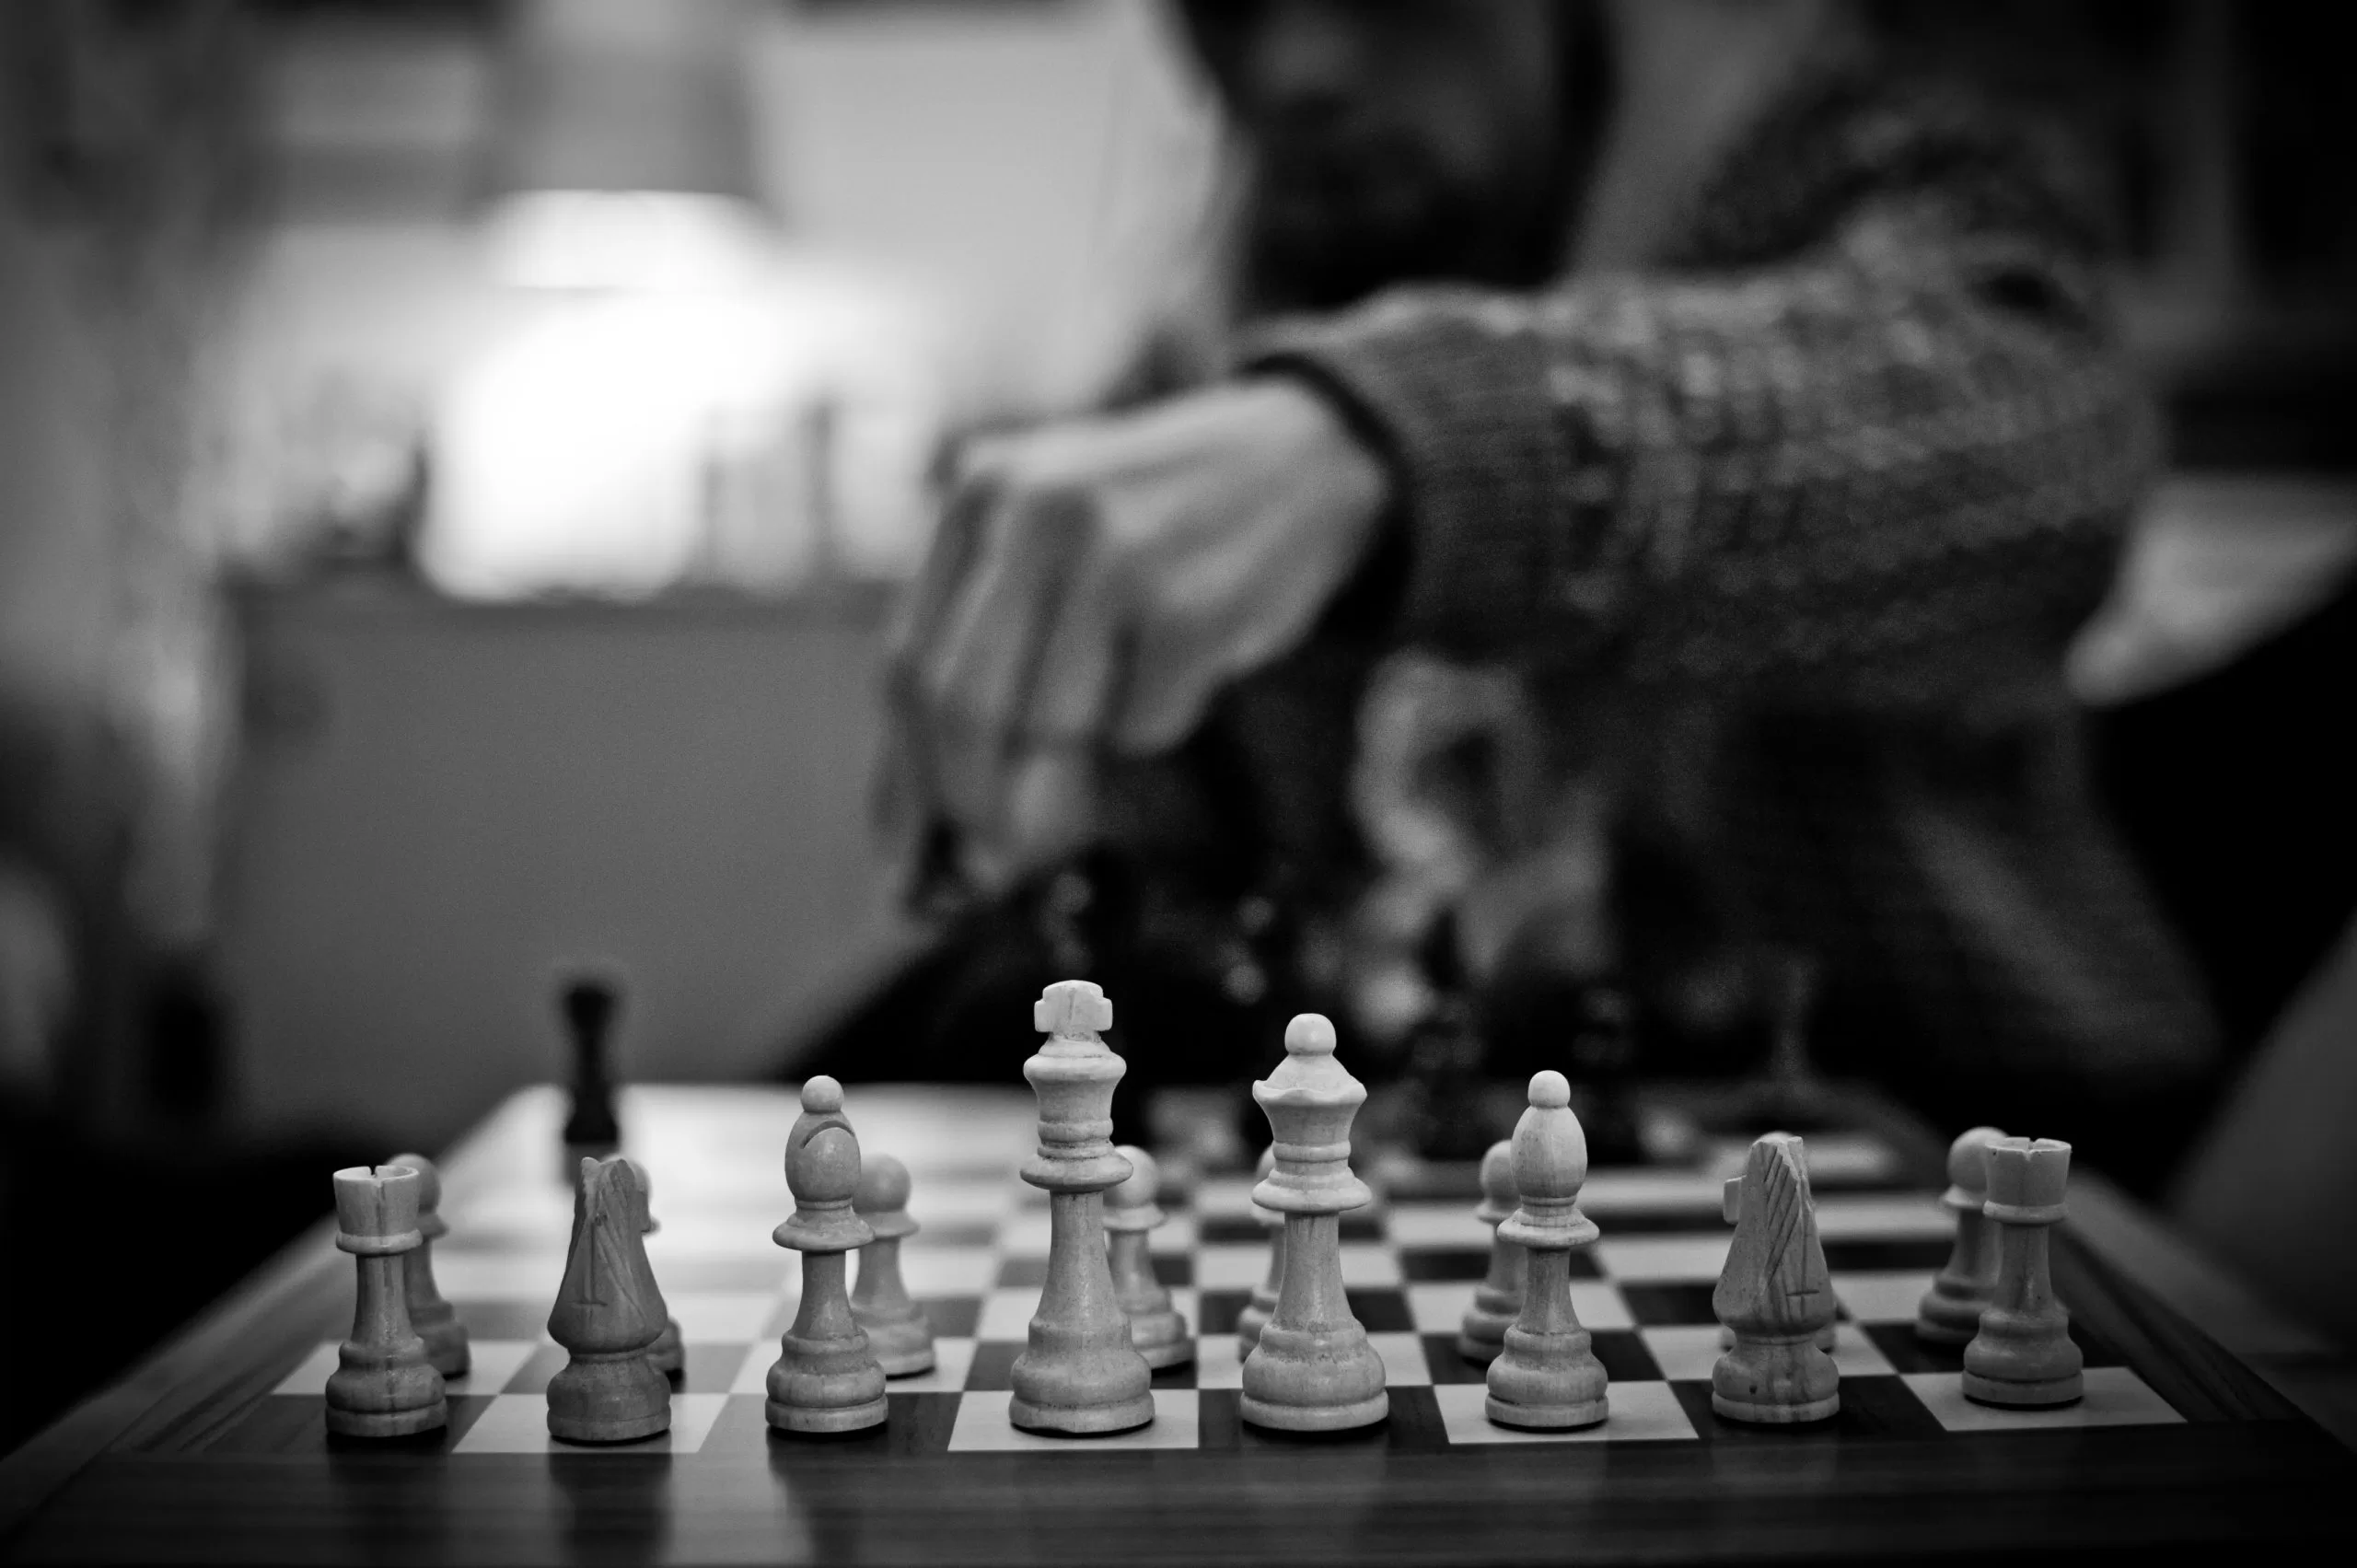 The Subculture of Chess